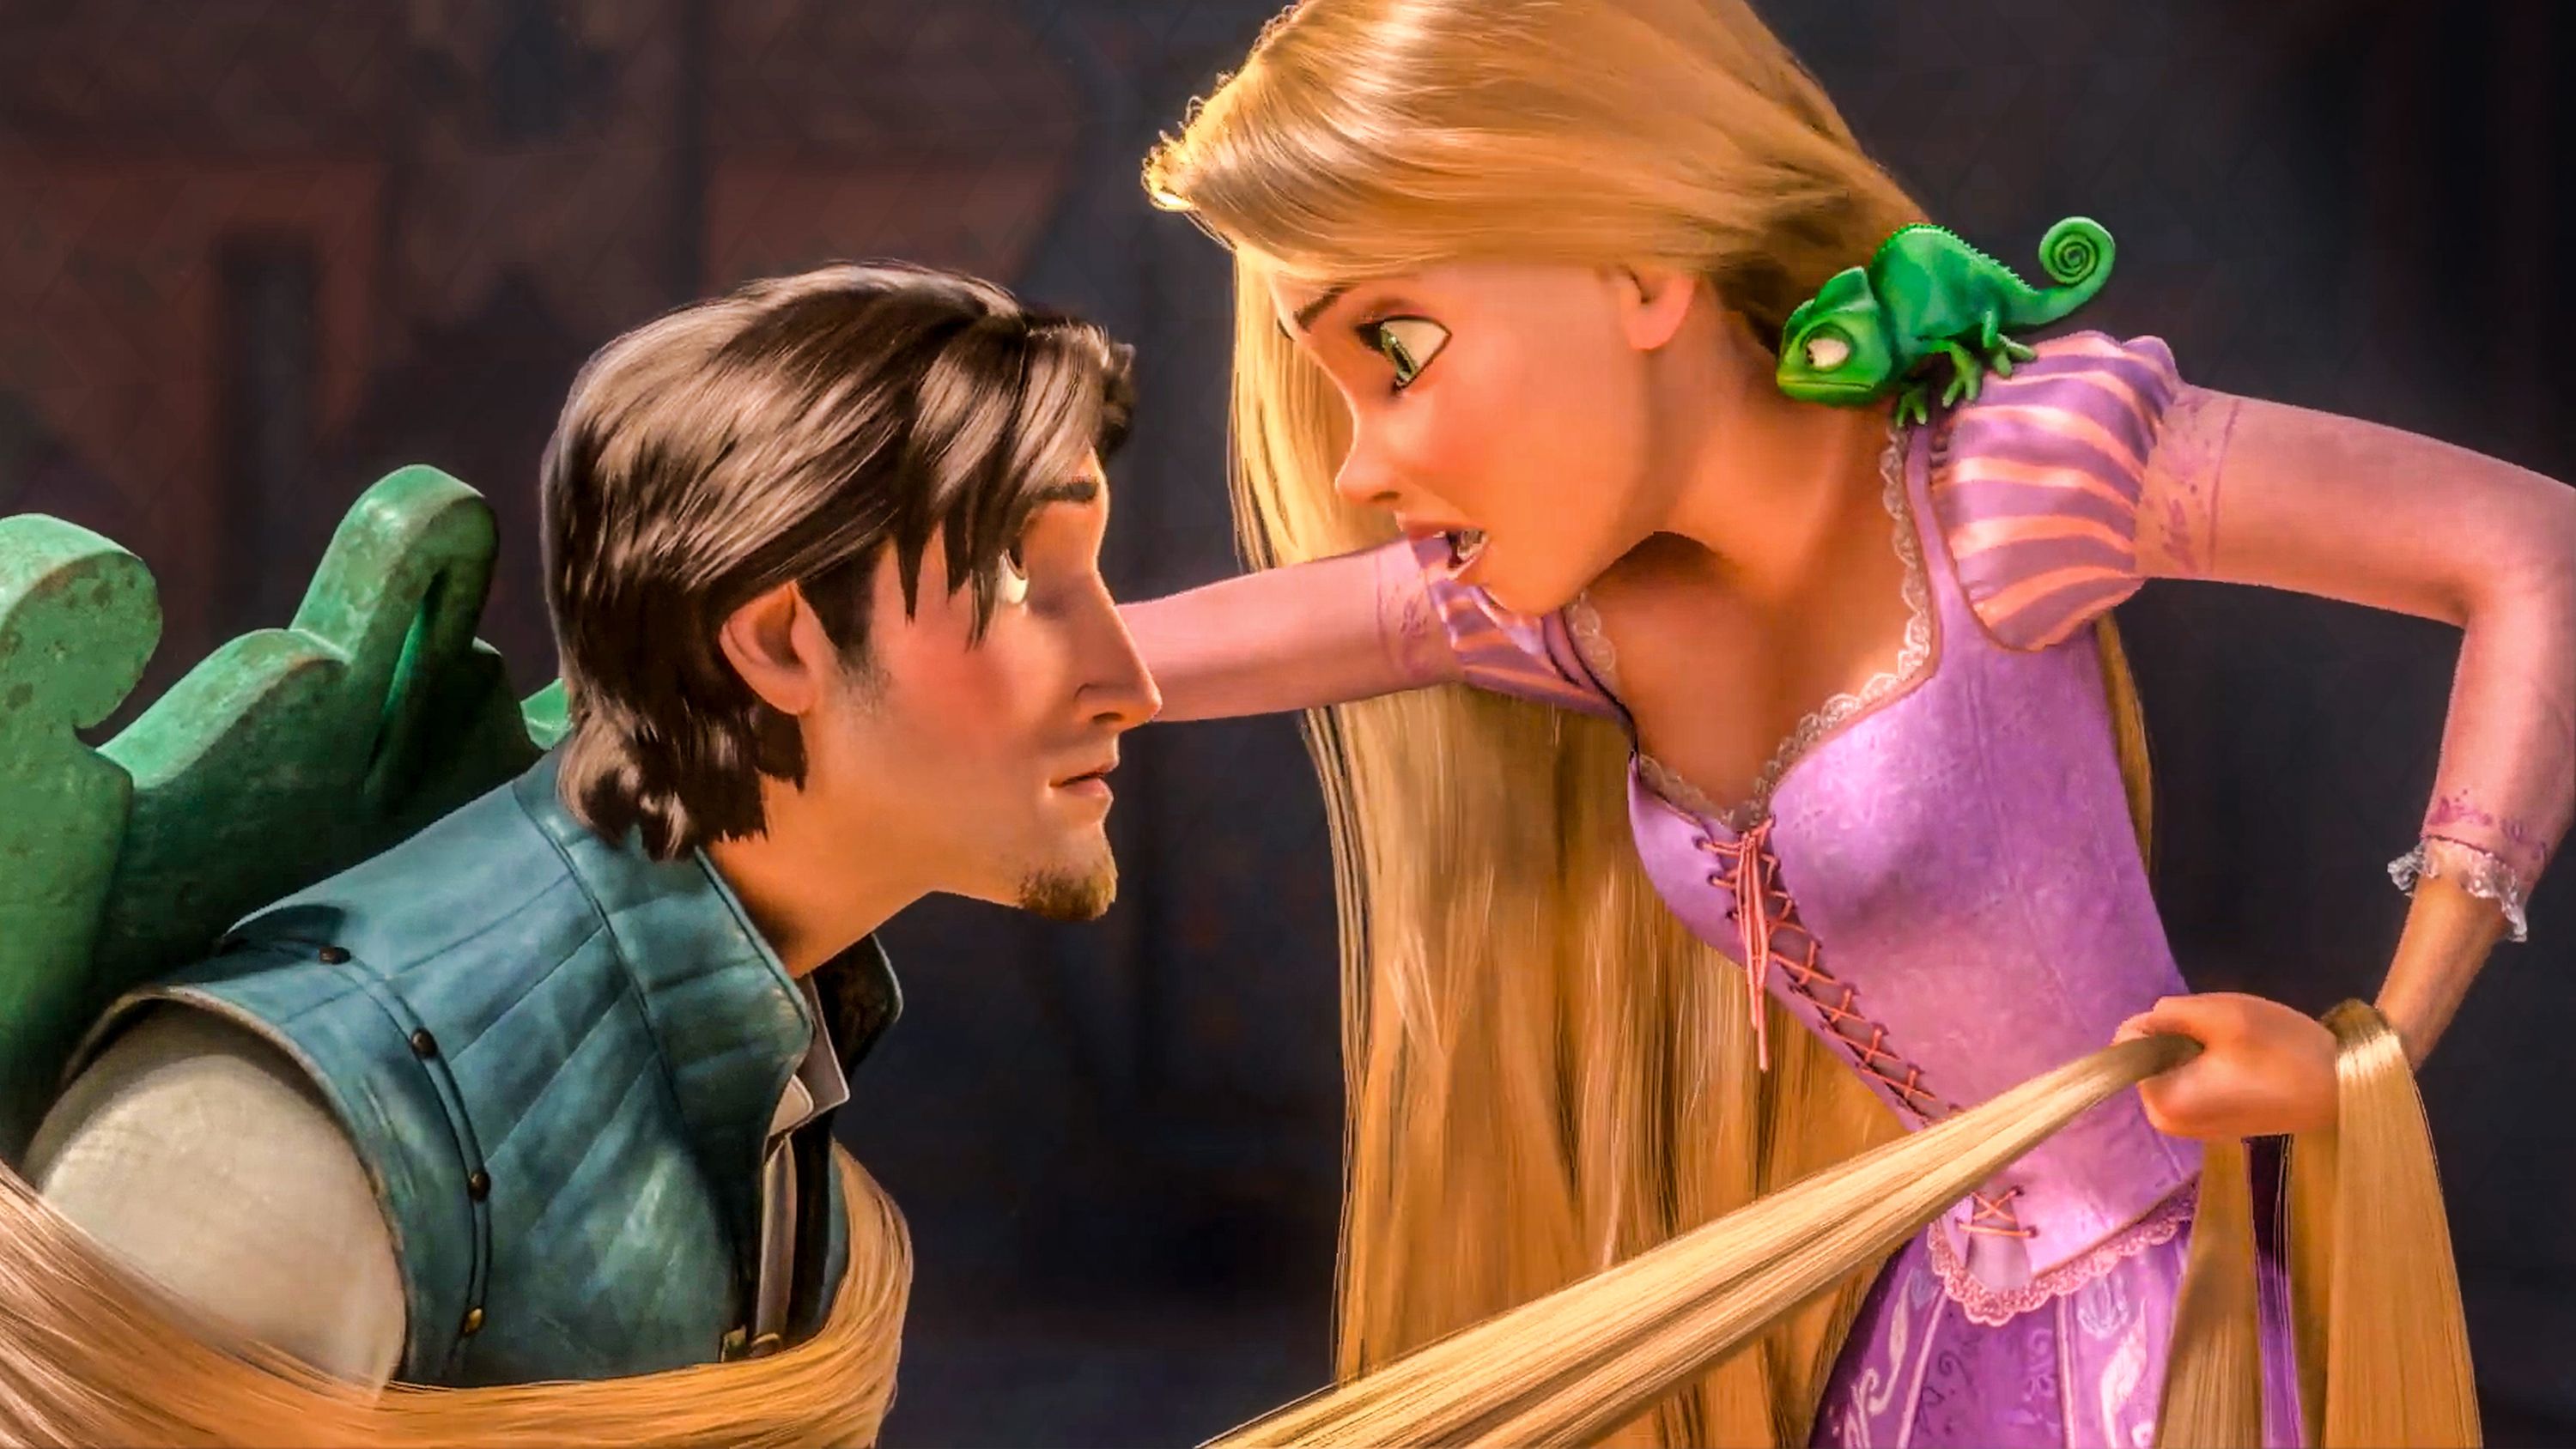 Florence Pugh is Disney's rumored favorite for Tangled live-action